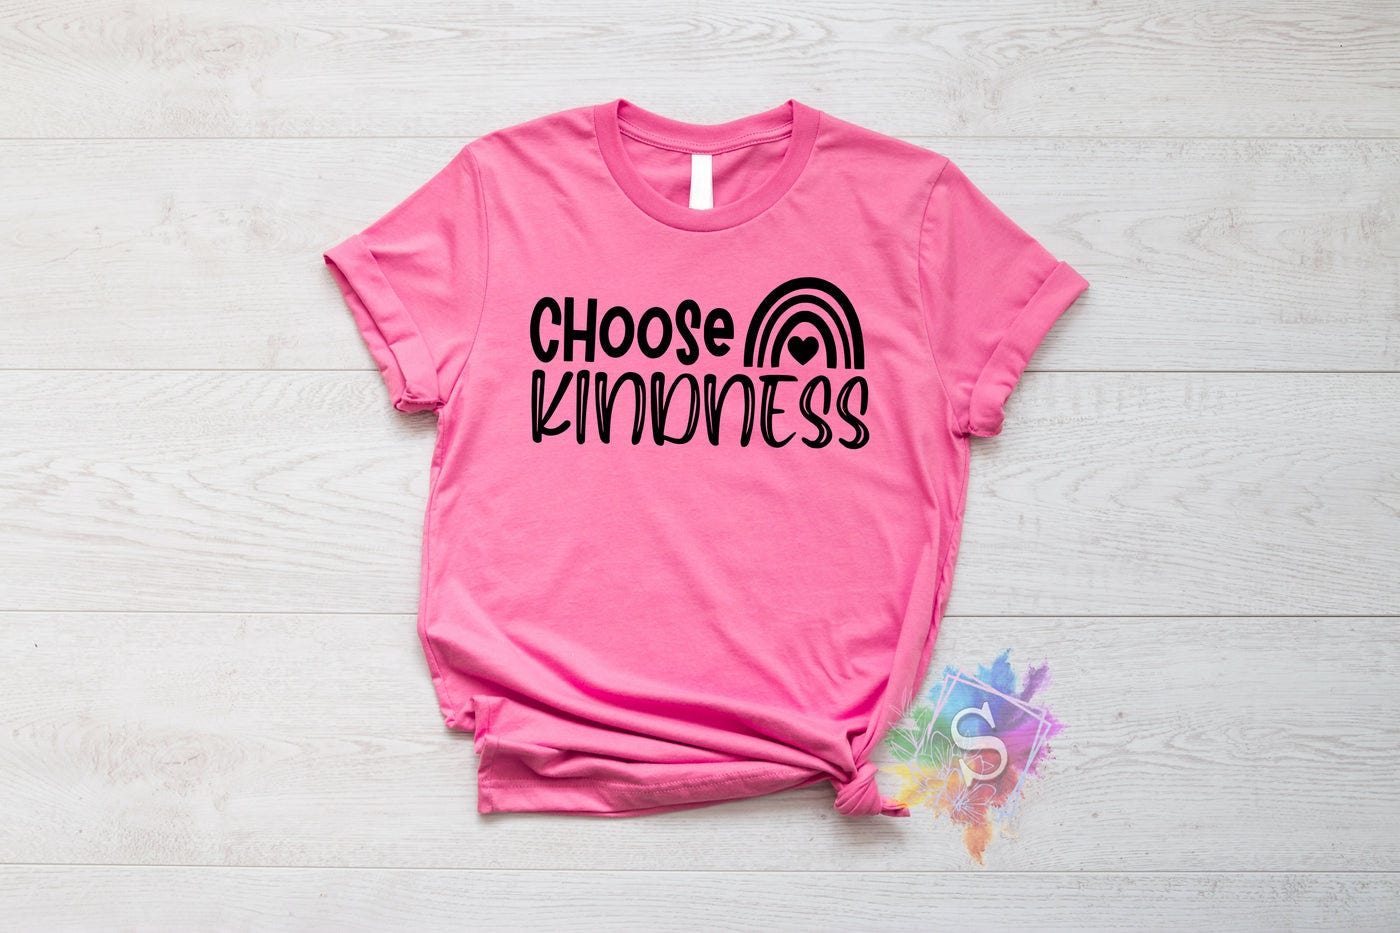 Pink Shirt Day T-shirt available at the 33rd Street location – The Hobnobber